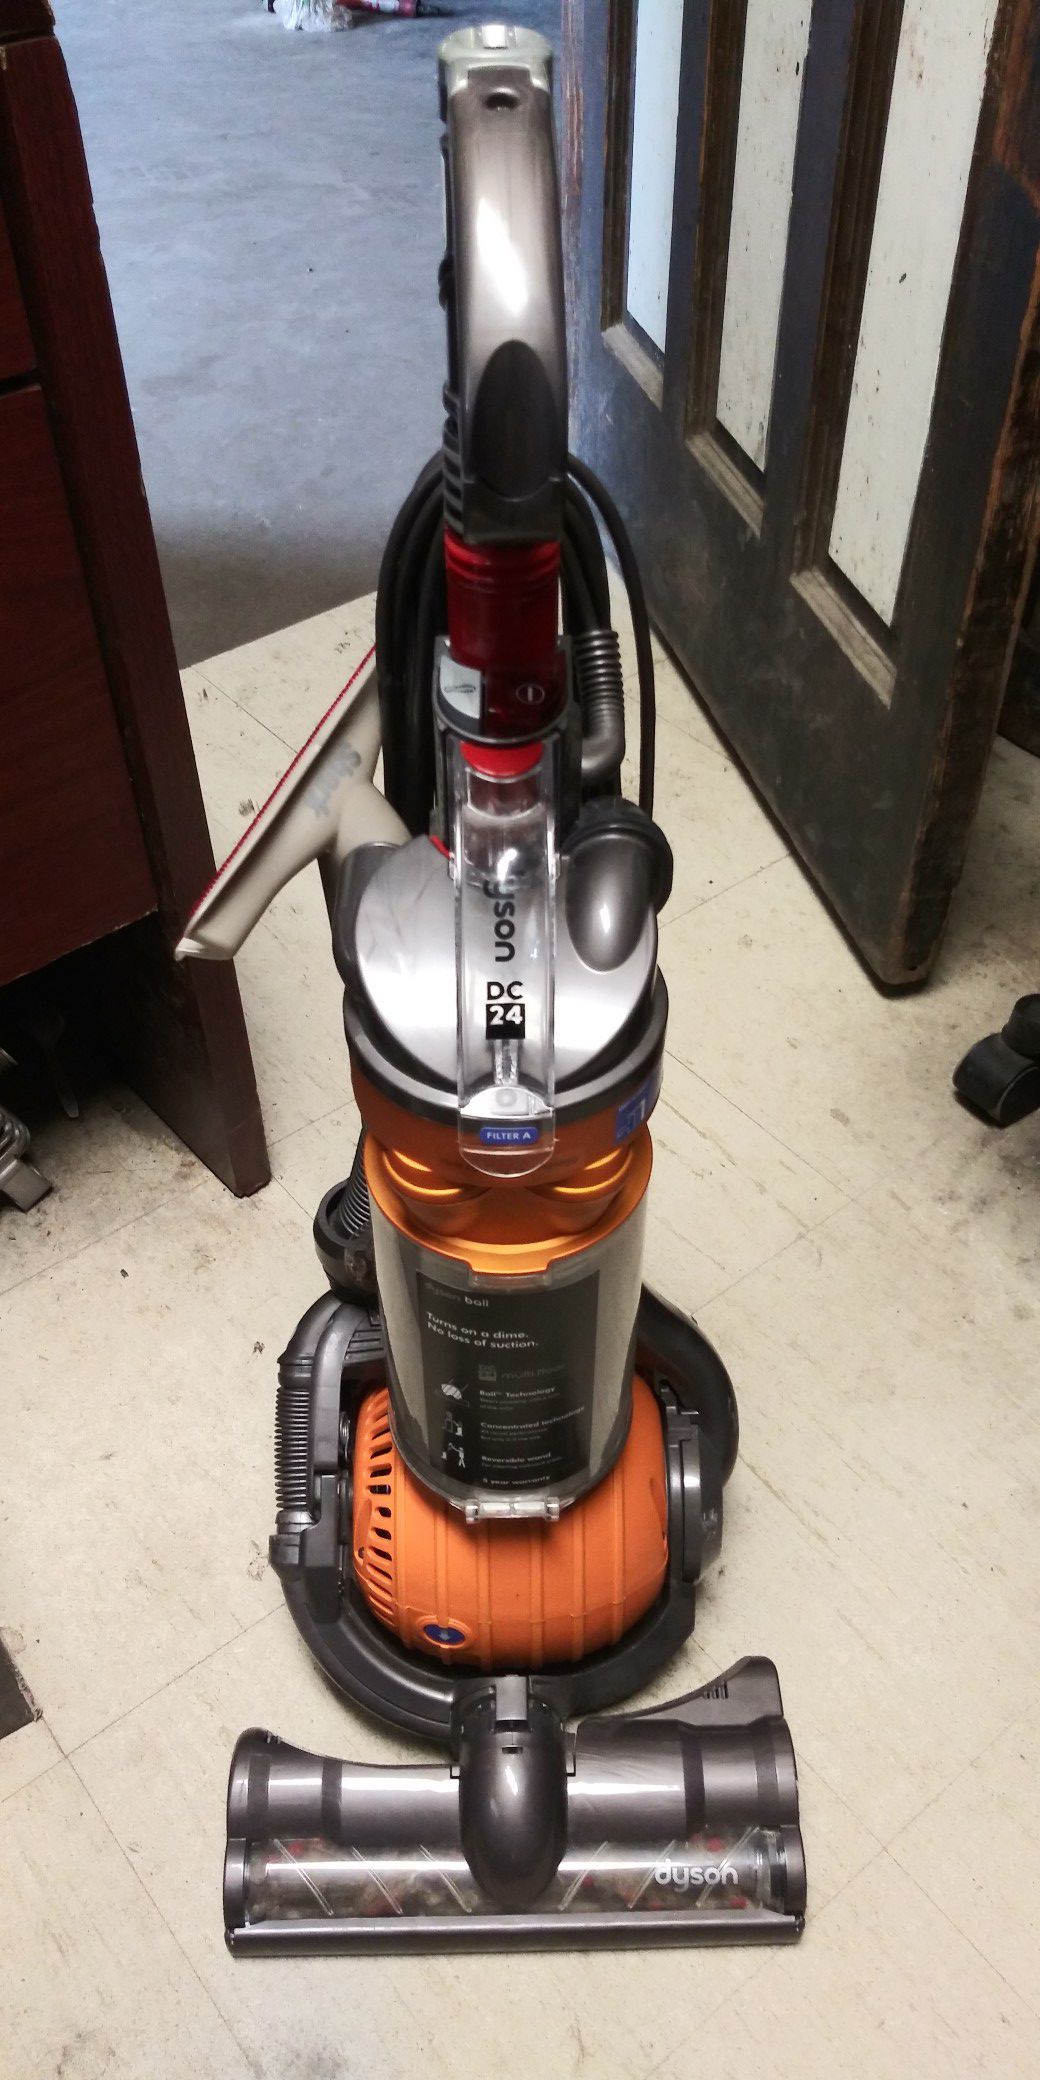 Dyson DC 24 Vacuum in used 4 times, In excellent condition